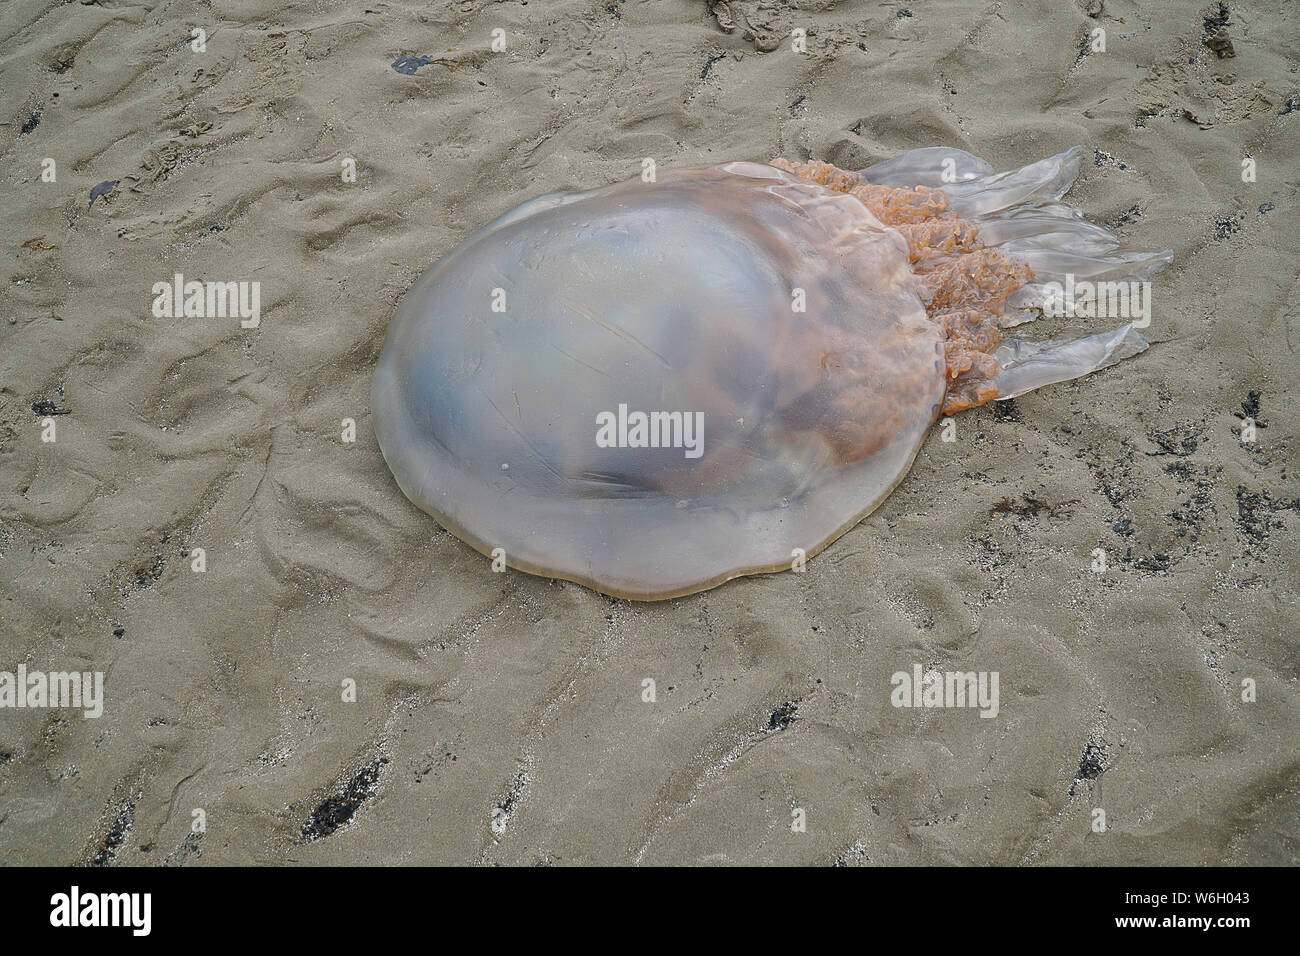 Large Barrel Jellyfish on the beach in the UK Stock Photo